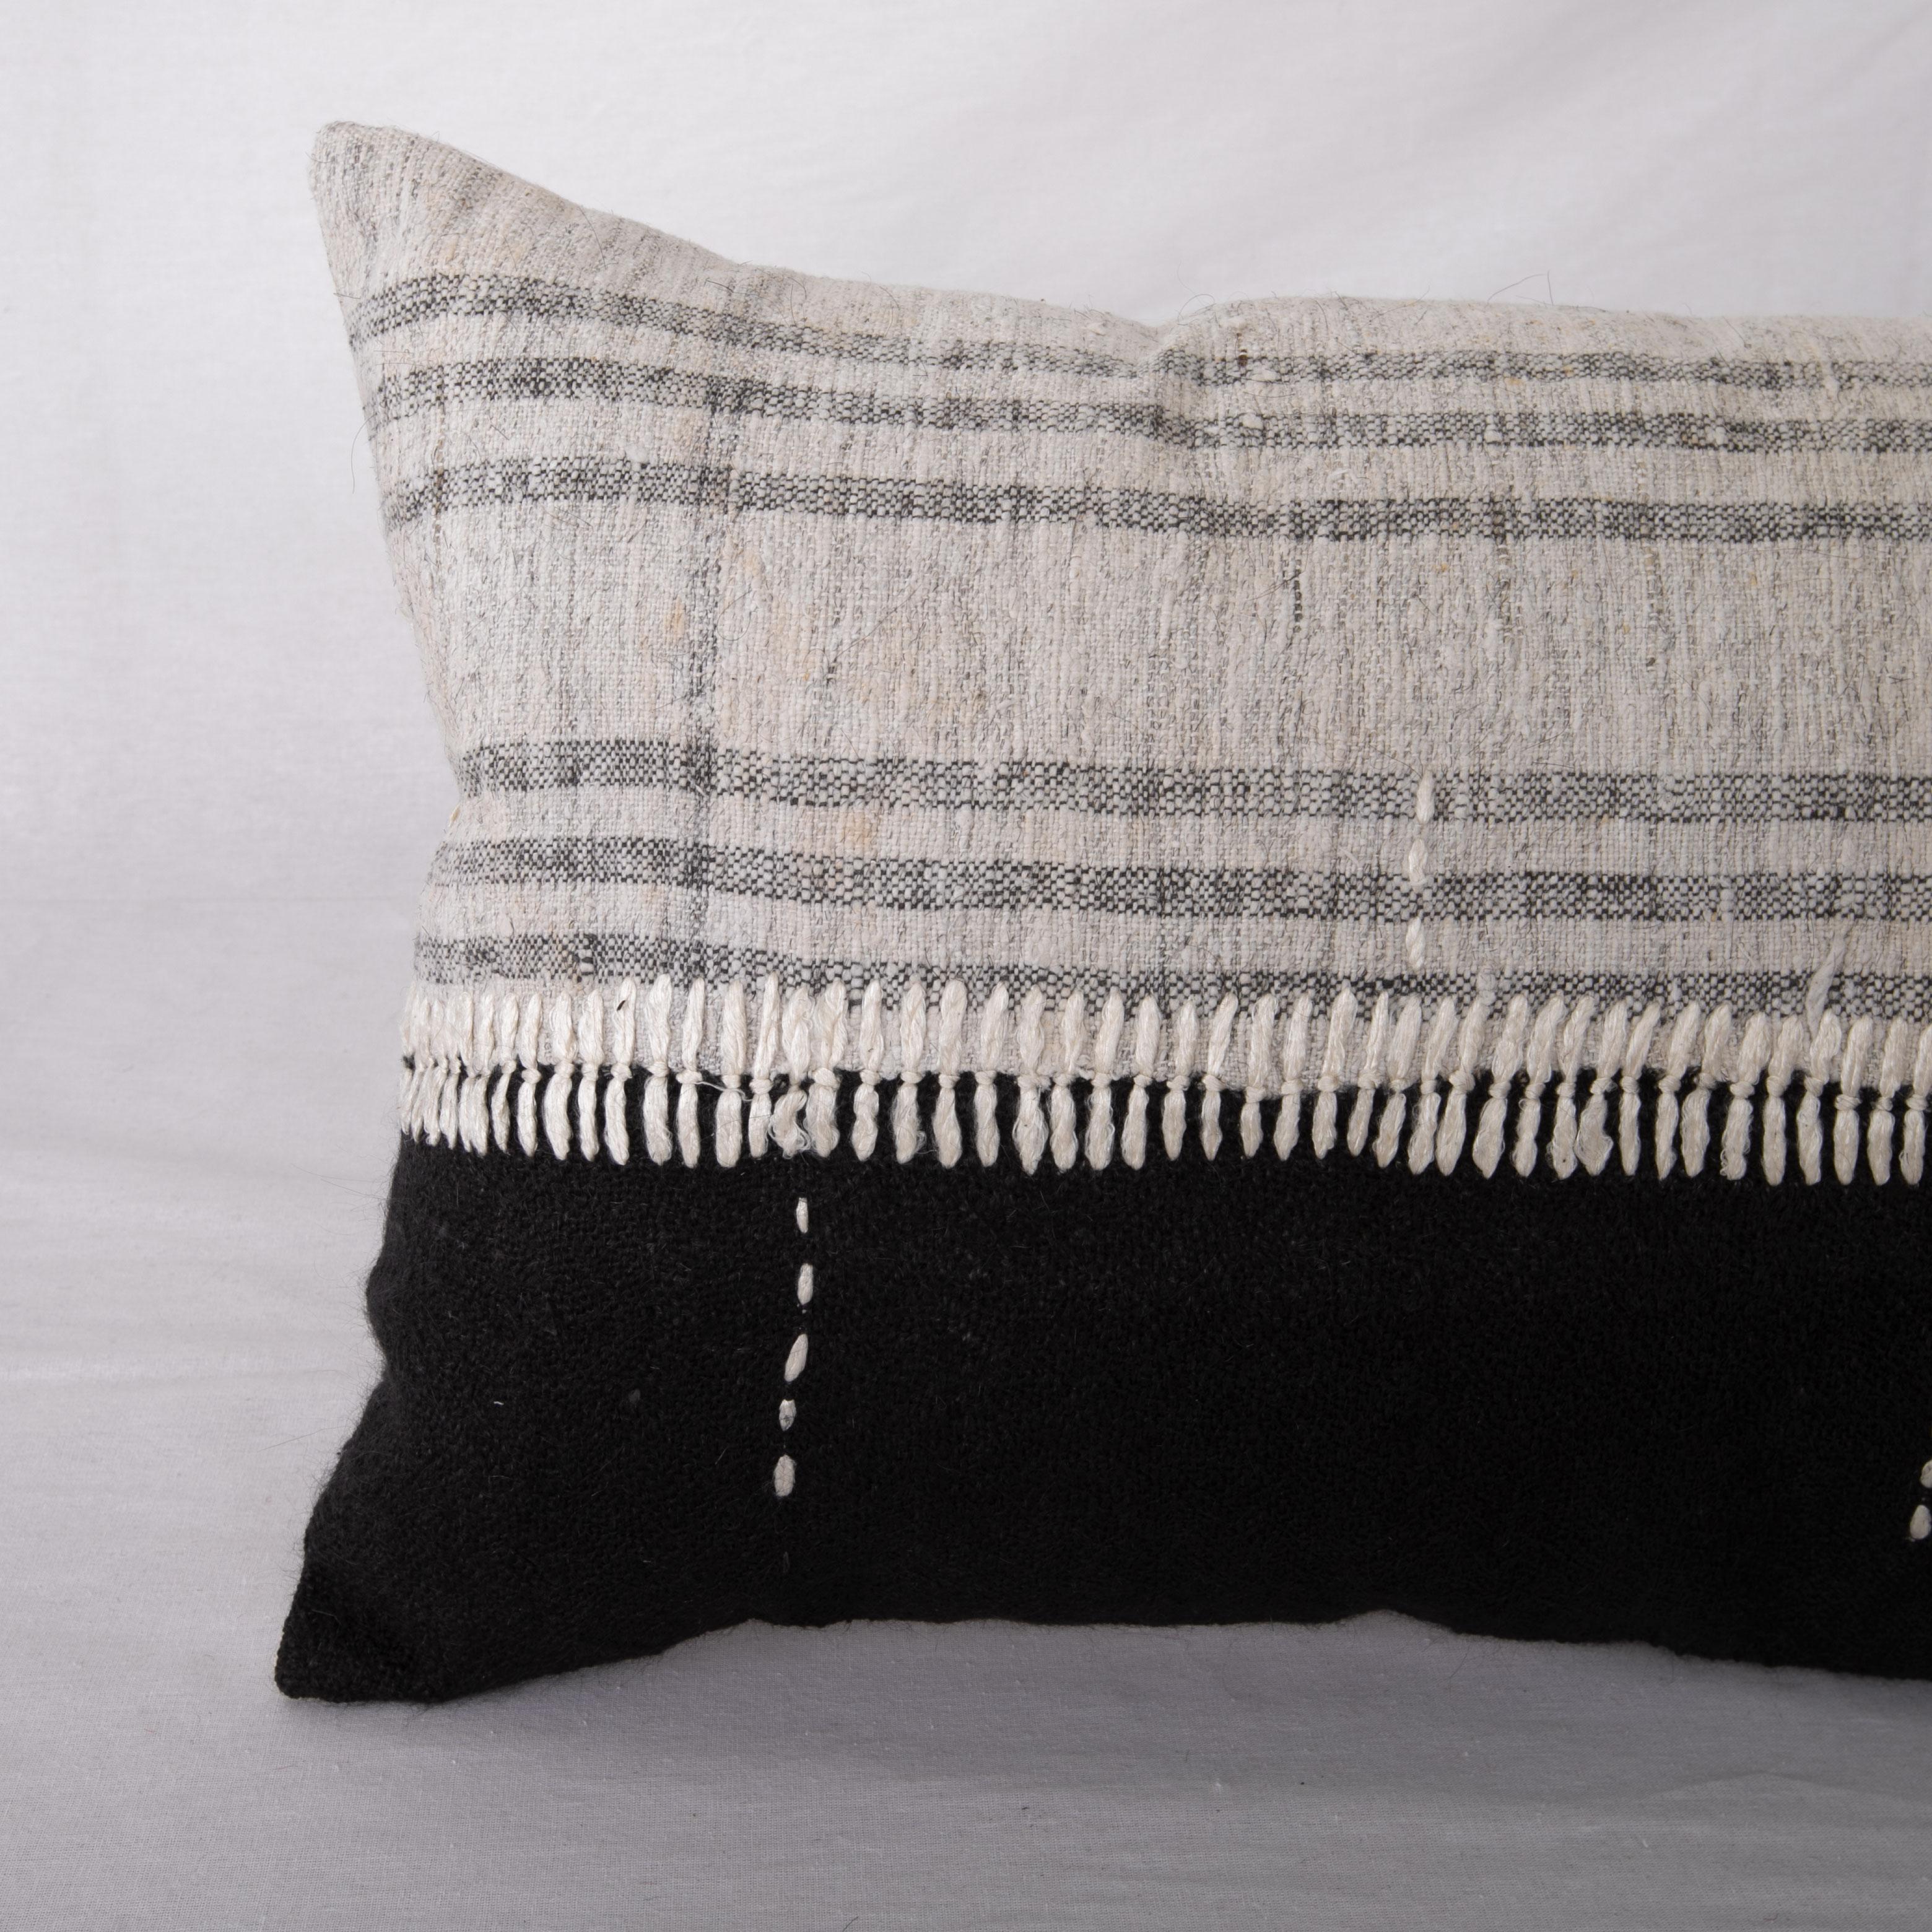 Hand-Woven Pillow Case Made from Anatolian Vintage Textiles